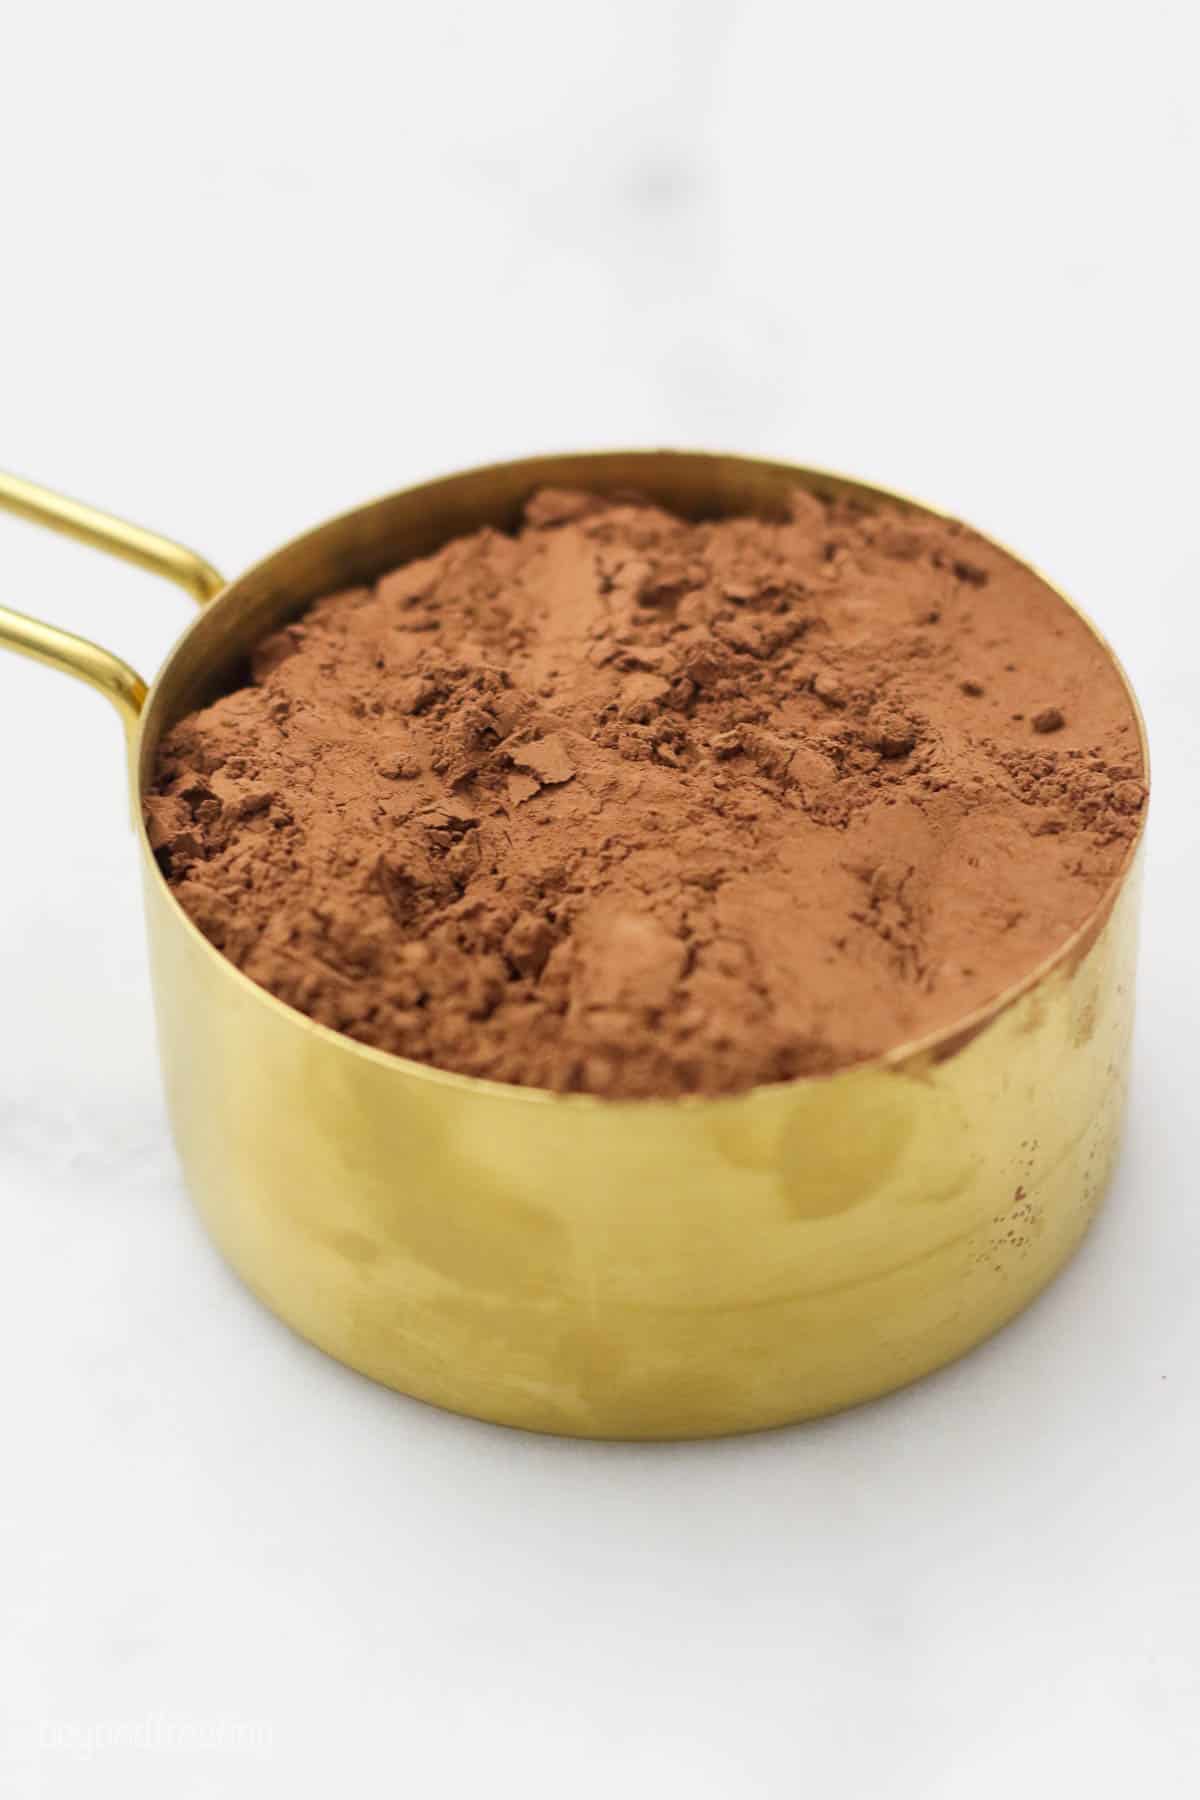 A gold measuring cup filled with cocoa powder